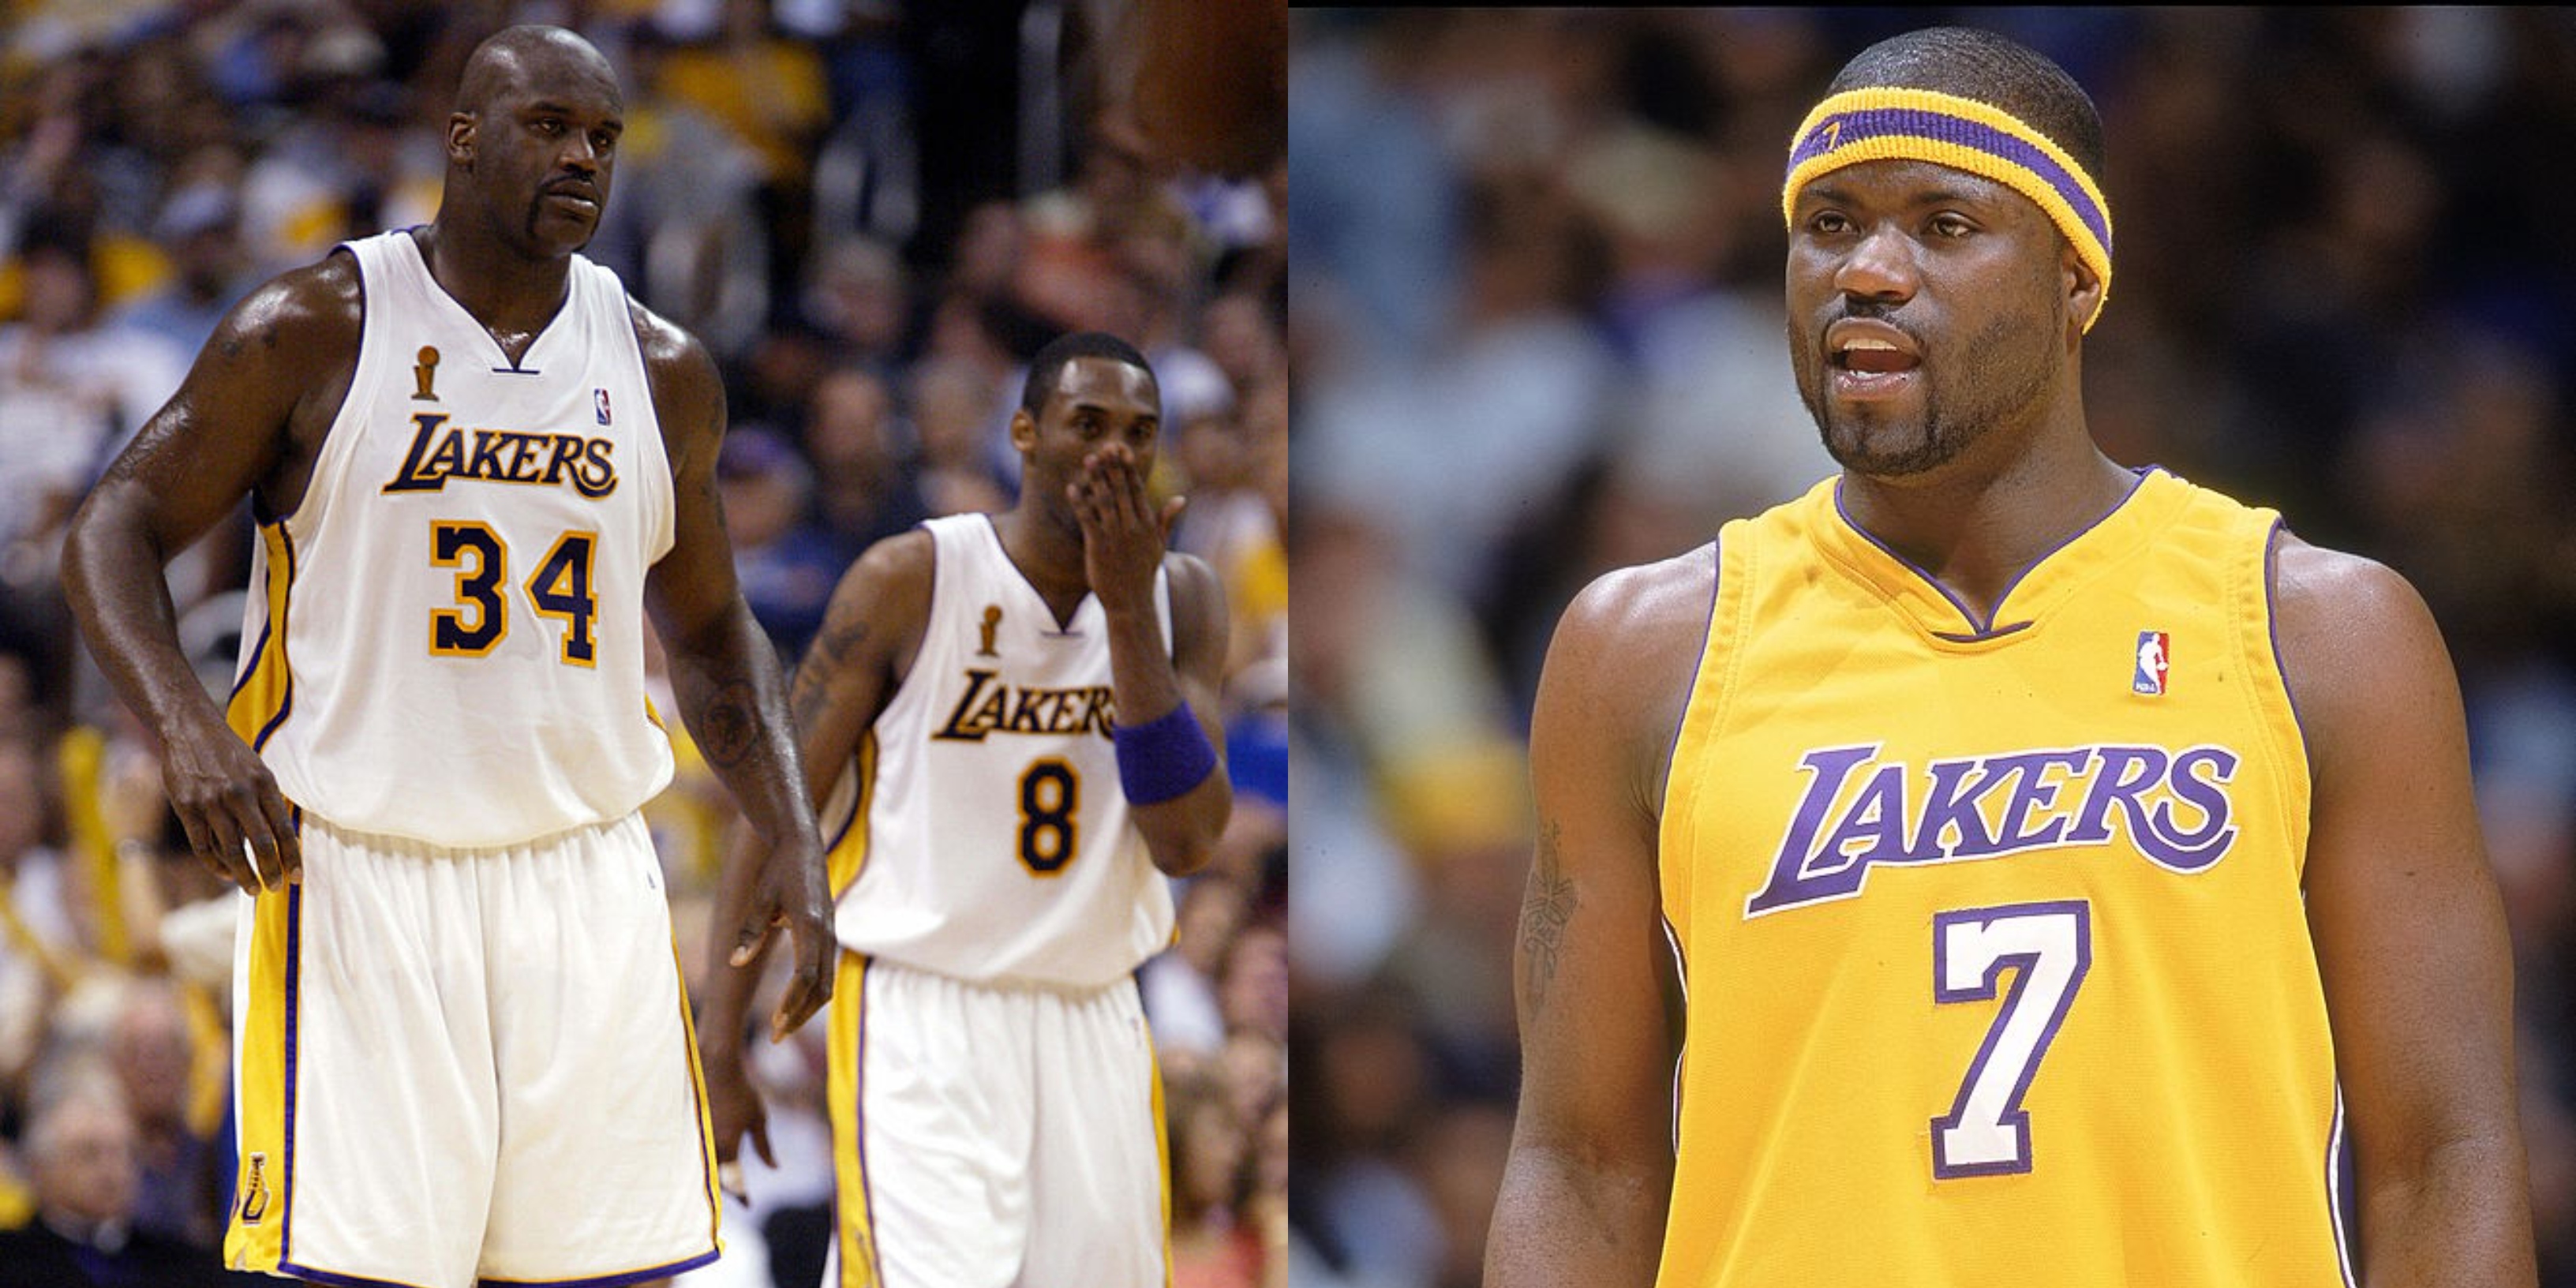 Shaq Once Tried To Pay Isaiah Rider $10K To Fight Kobe Bryant ...